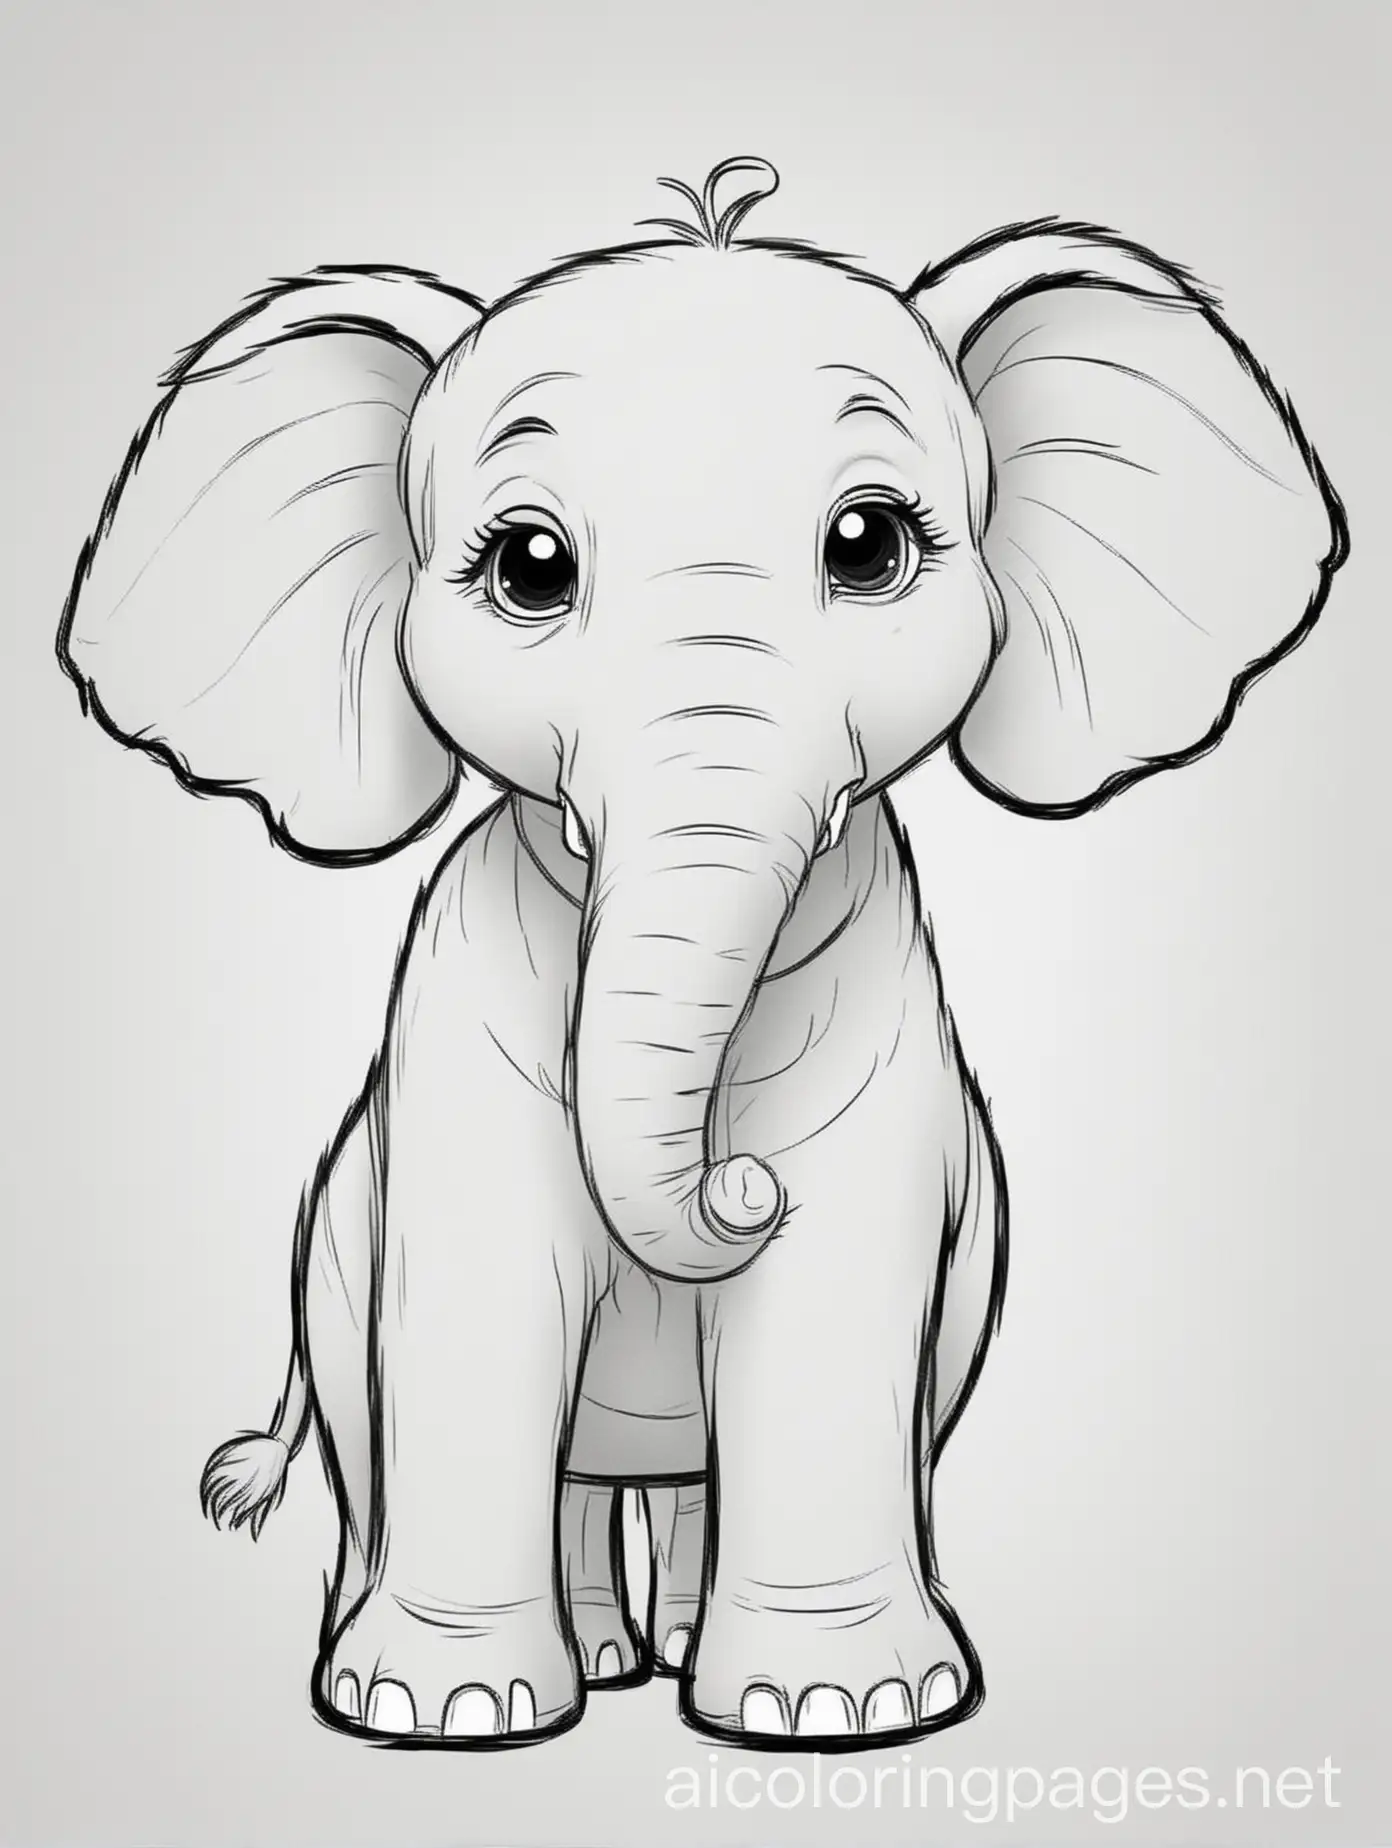 Cartoon-Elephant-Coloring-Page-on-White-Background